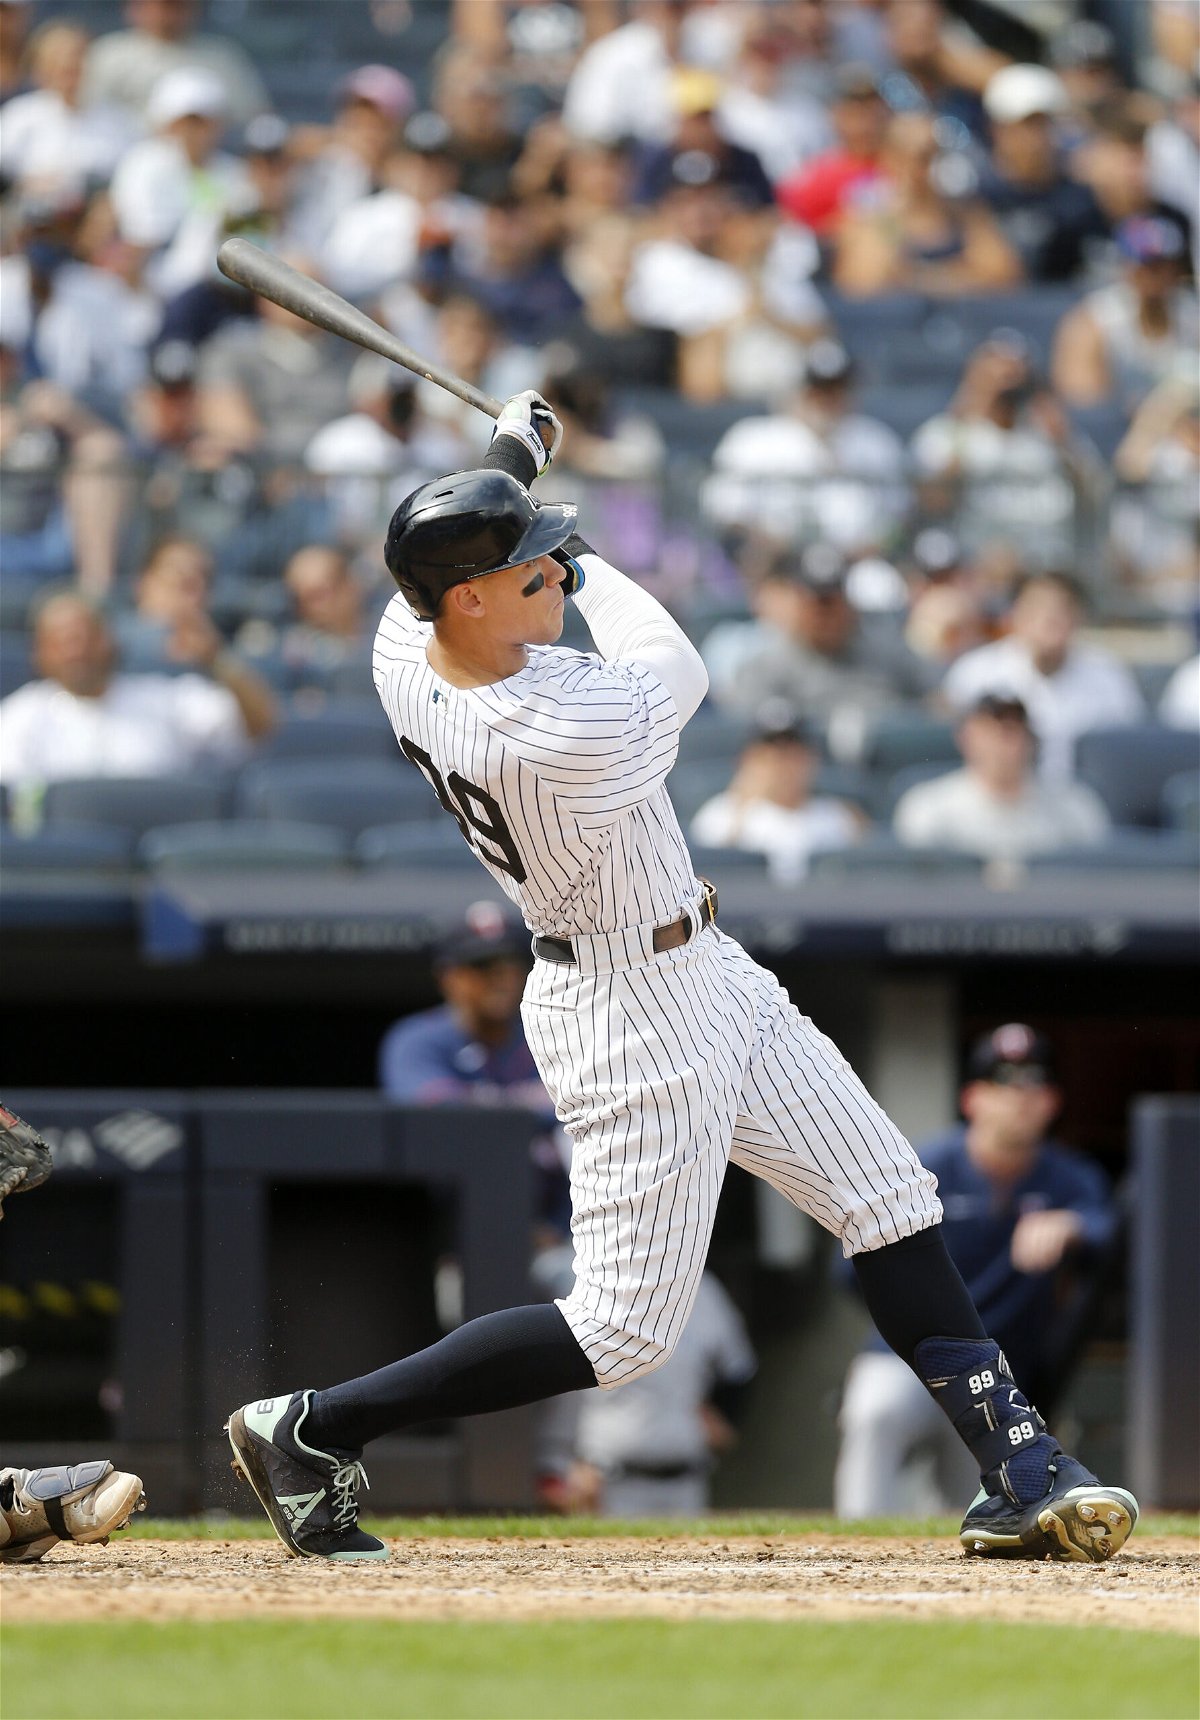 <i>Jim McIsaac/Getty Images</i><br/>Judge hits a two-run home run against the Twins.